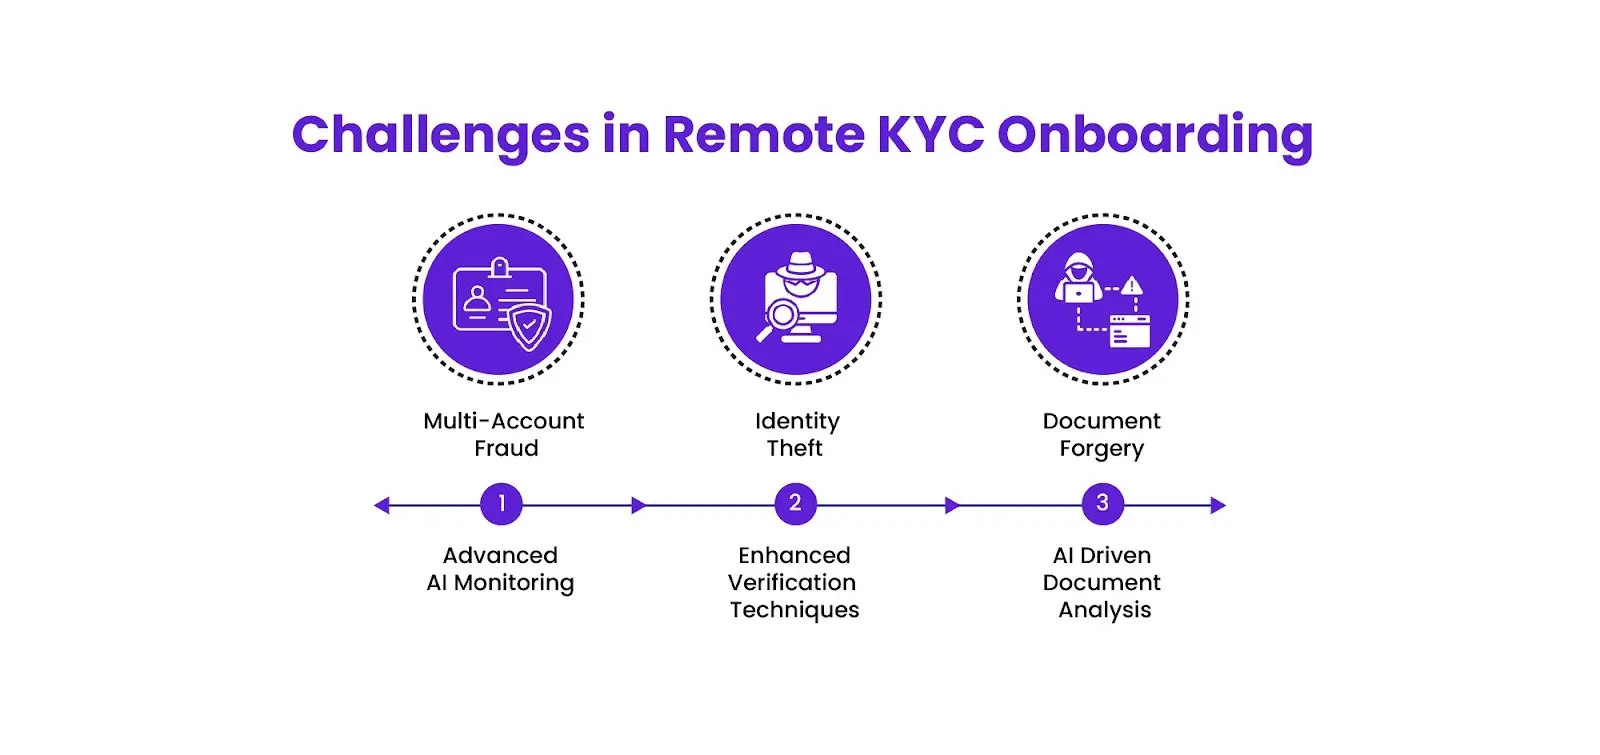  Challenges in Remote KYC Onboarding